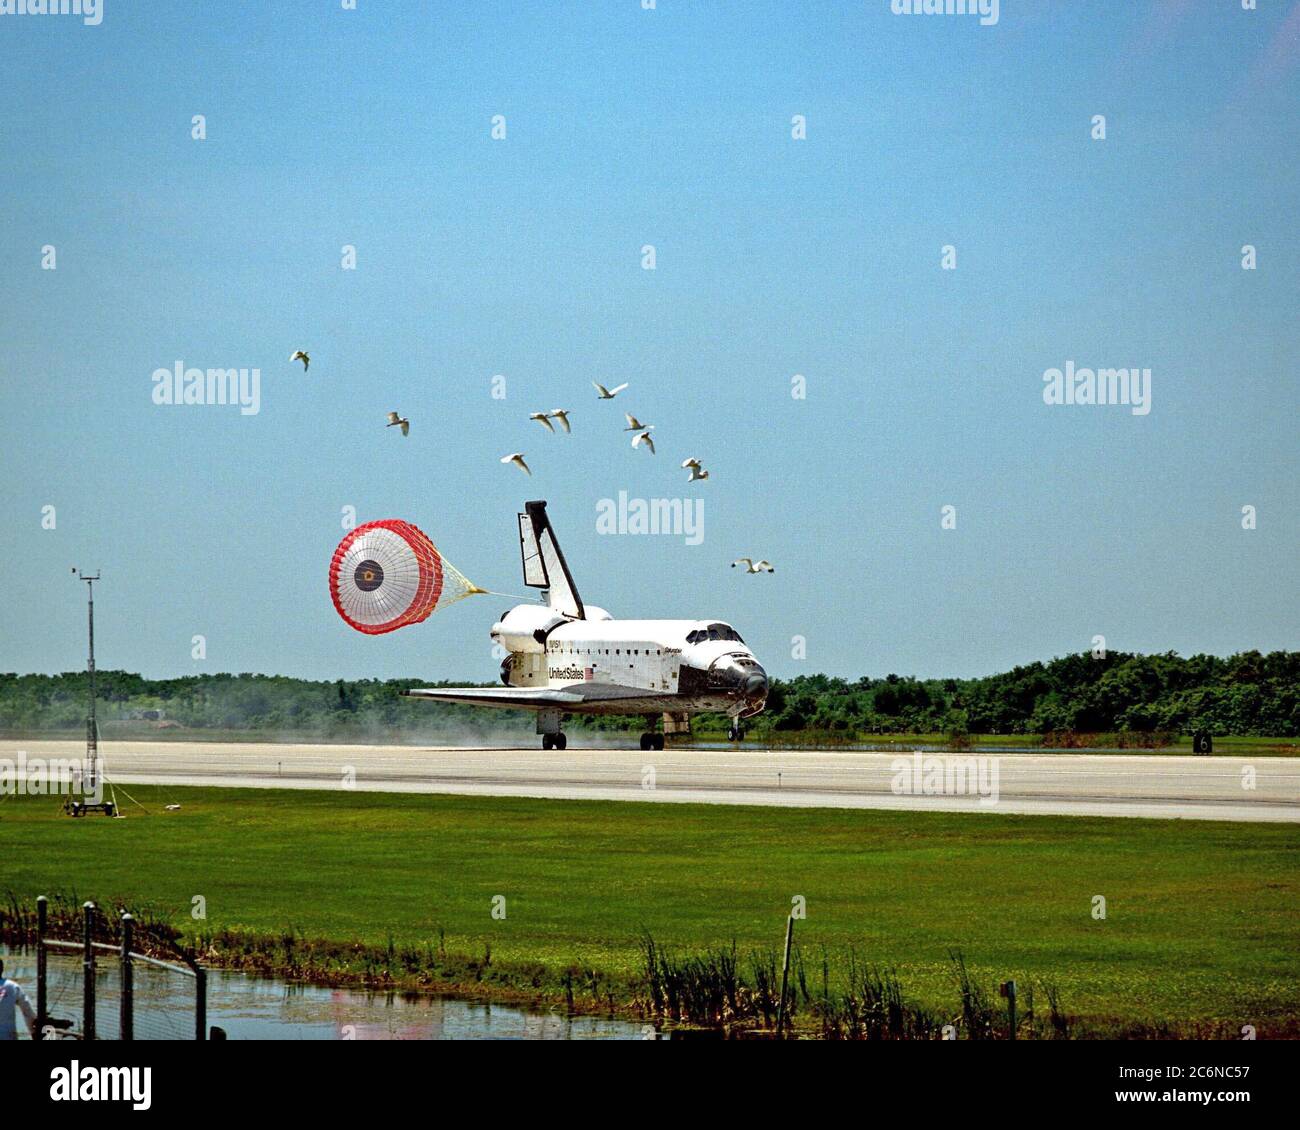 A flock of birds takes flight as the orbiter Columbia, with its drag chute deployed, touches down on Runway 33 of KSC's Shuttle Landing Facility to complete the nearly 16-day STS-90 mission. Main gear touchdown was at 12:08:59 p.m. EDT on May 3, 1998, landing on orbit 256 of the mission. The wheels stopped at 12:09:58 EDT, completing a total mission time of 15 days, 21 hours, 50 minutes and 58 seconds. Stock Photo